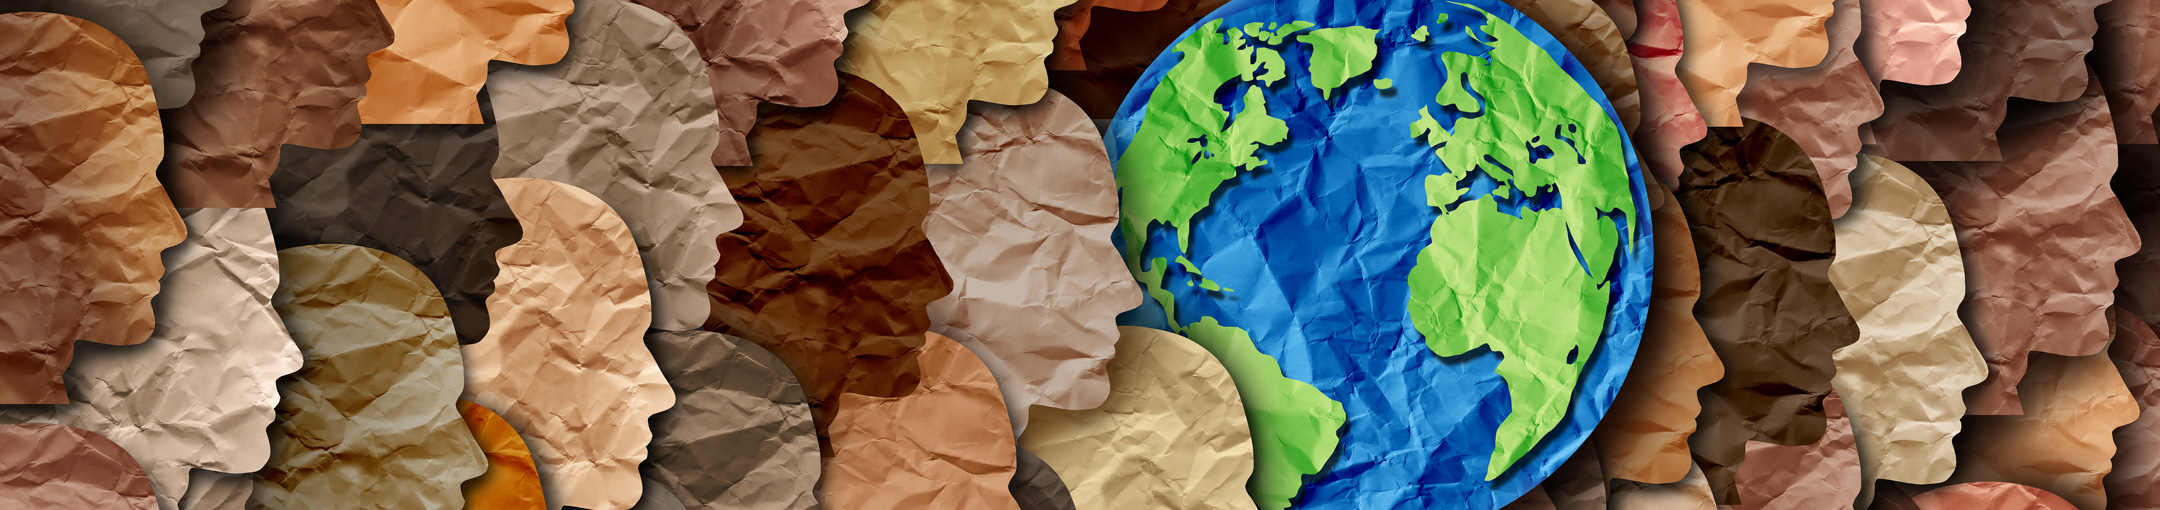 paper graphic of multi colored face profiles and blue and green earth globe